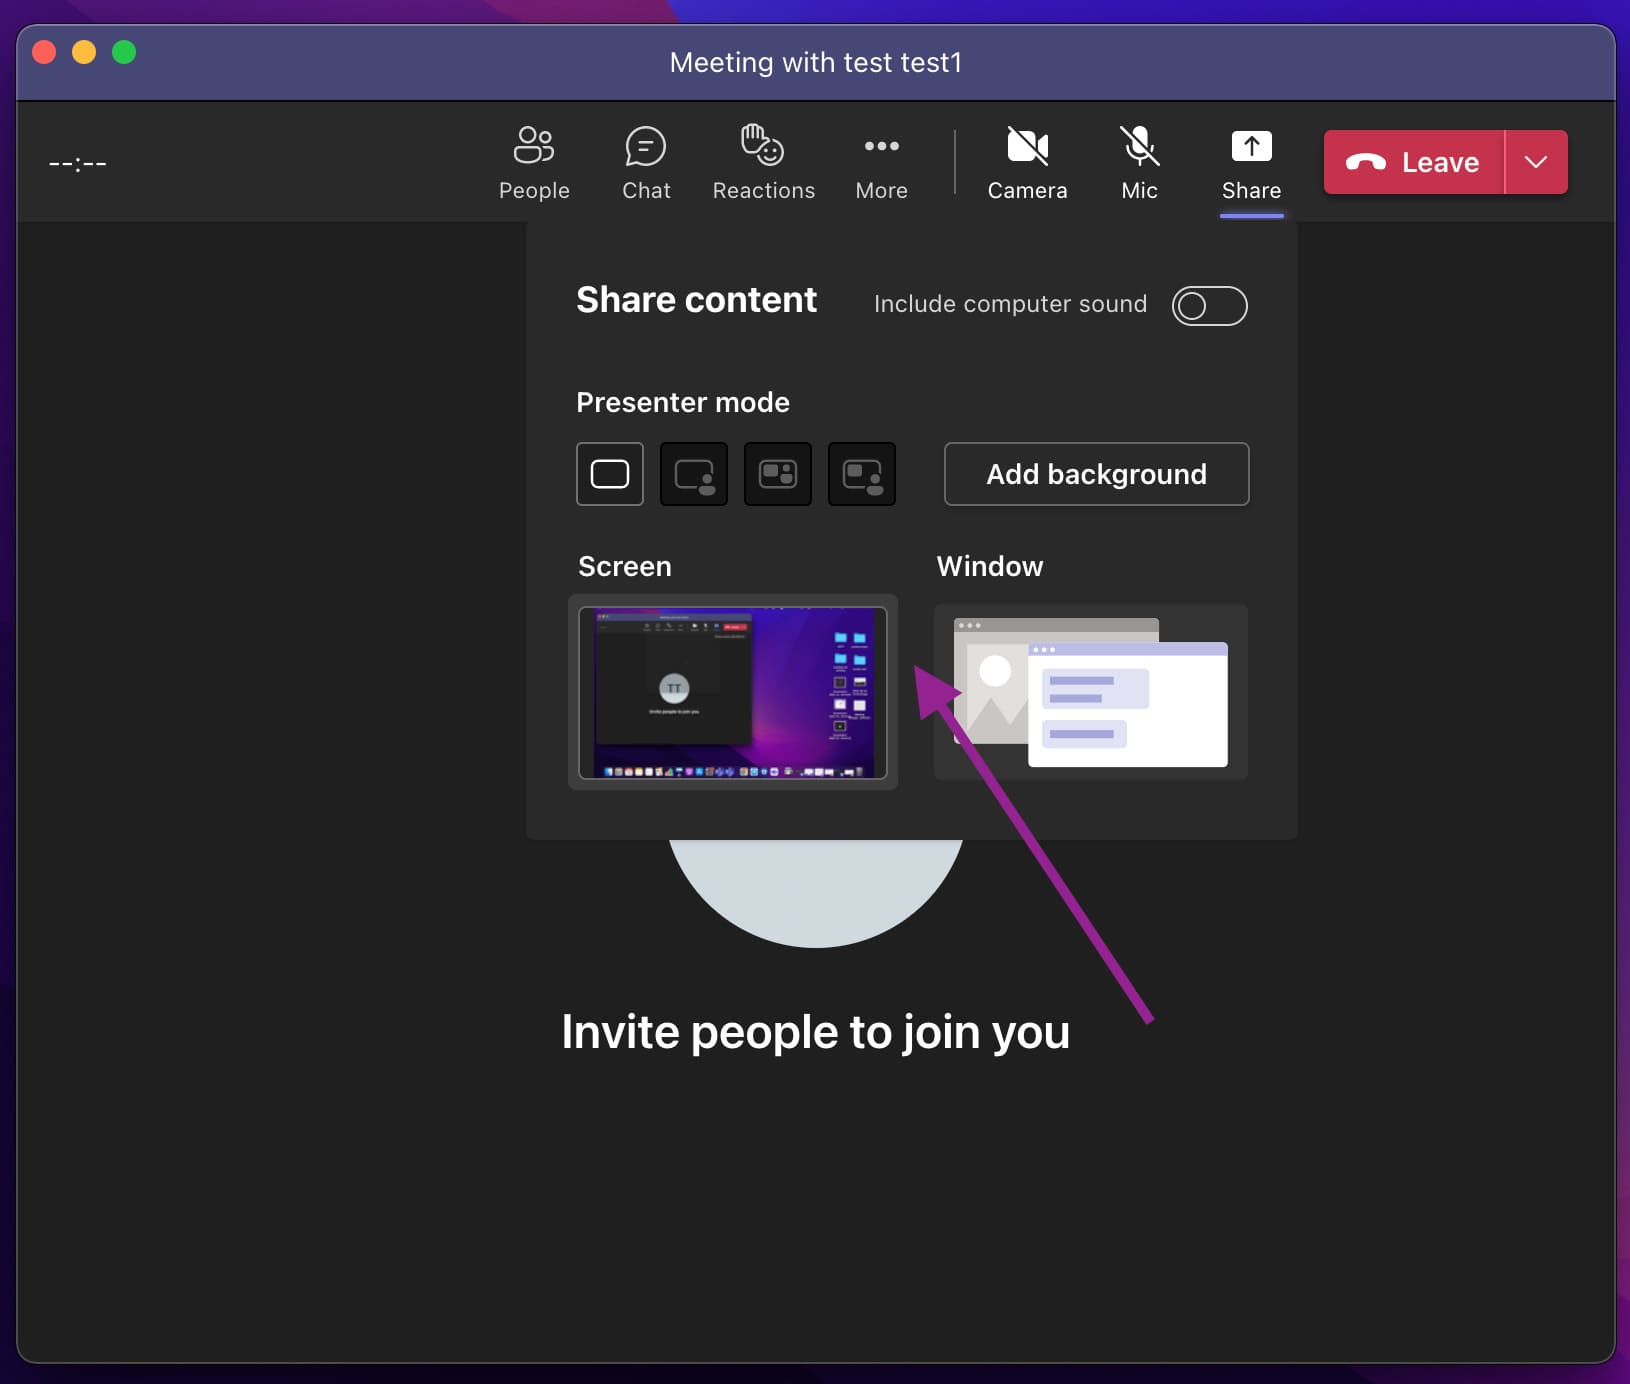 How to screen share in Teams